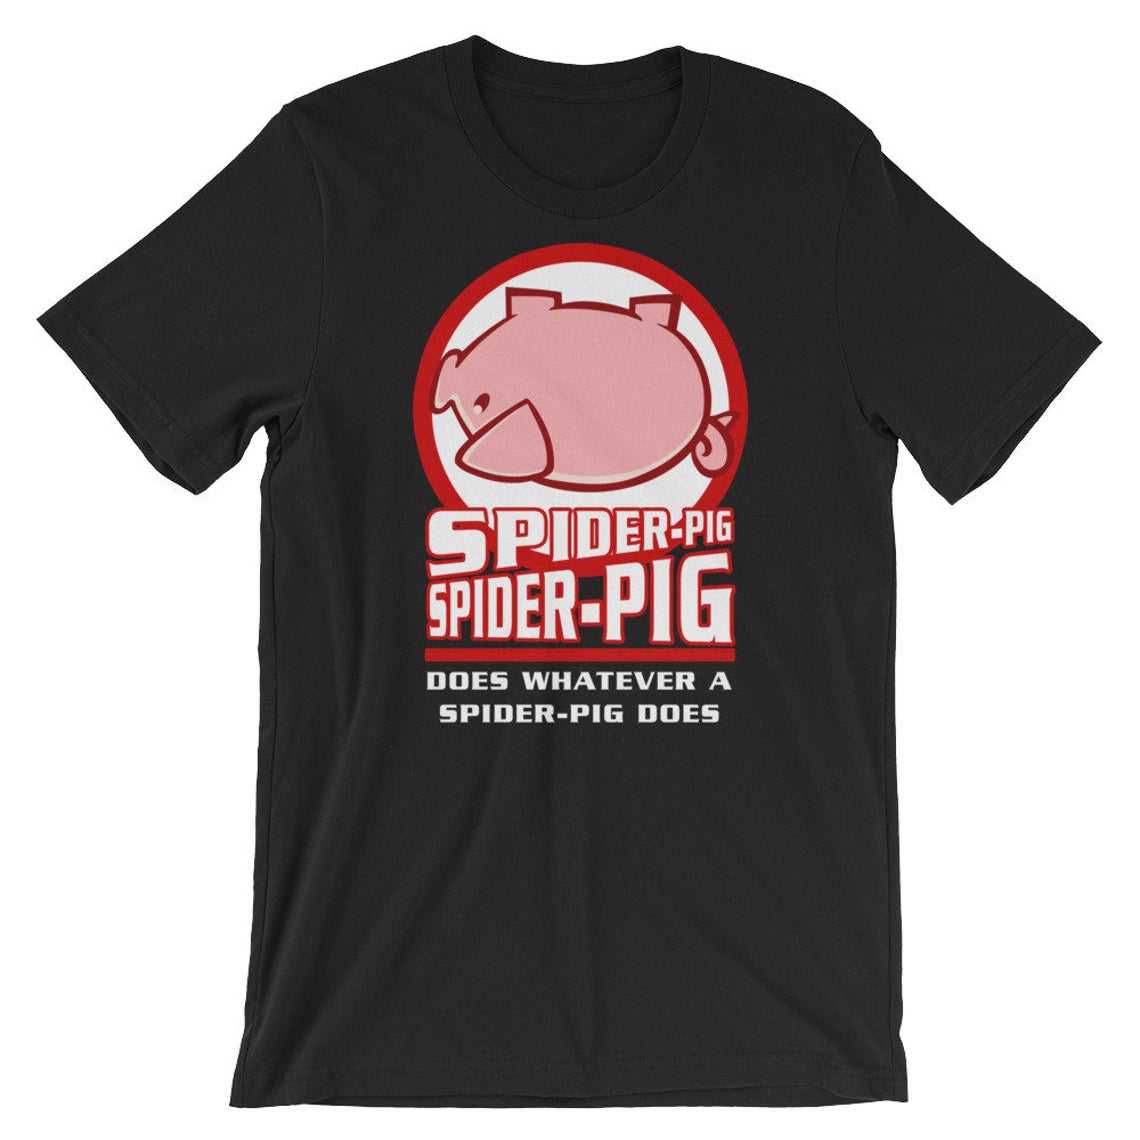 Spider-Pig does whatever a Spider-Pig does Tv Series T-Shirt NA